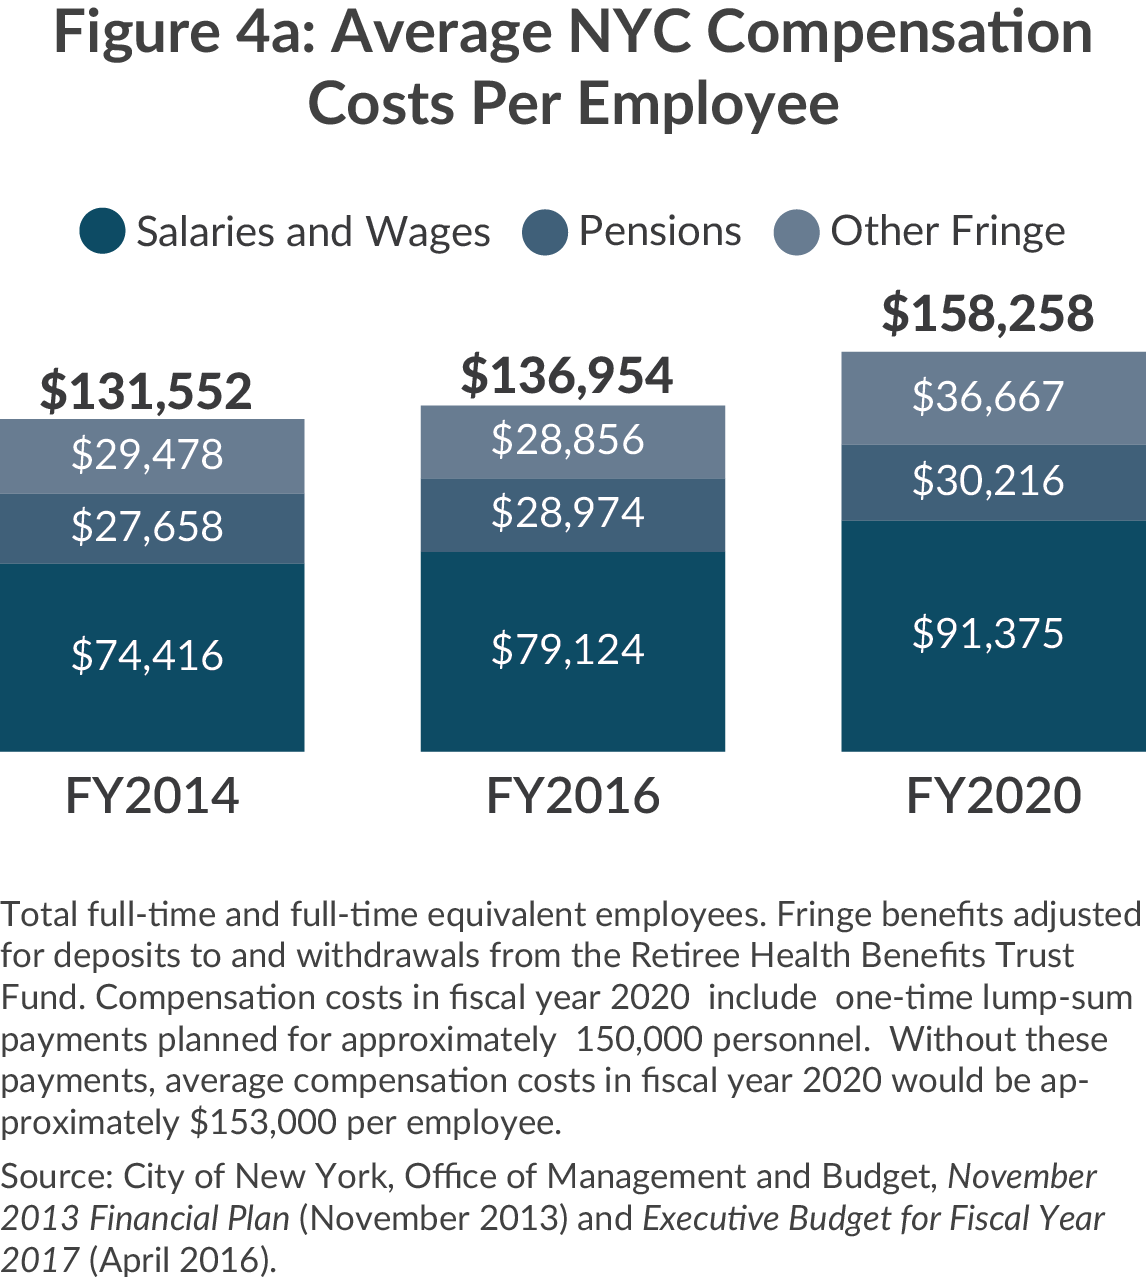 Average Compensation Cost Per NYC Employee